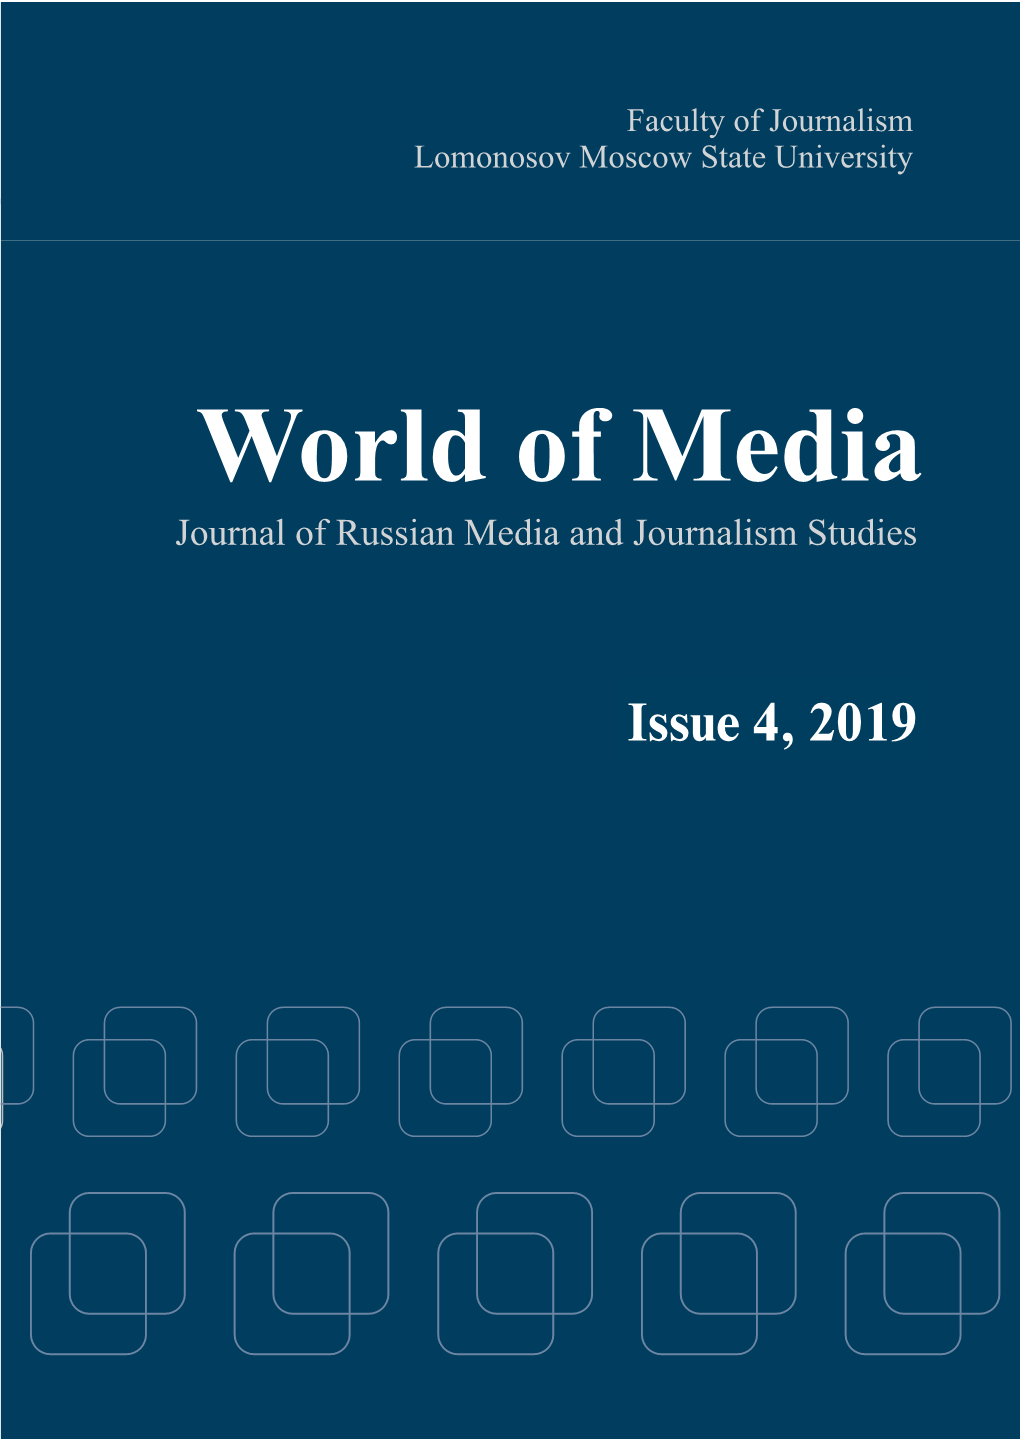 Issue 4, 2019 World of Media Journal of Russian Media and Journalism Studies Issue 4, 2019